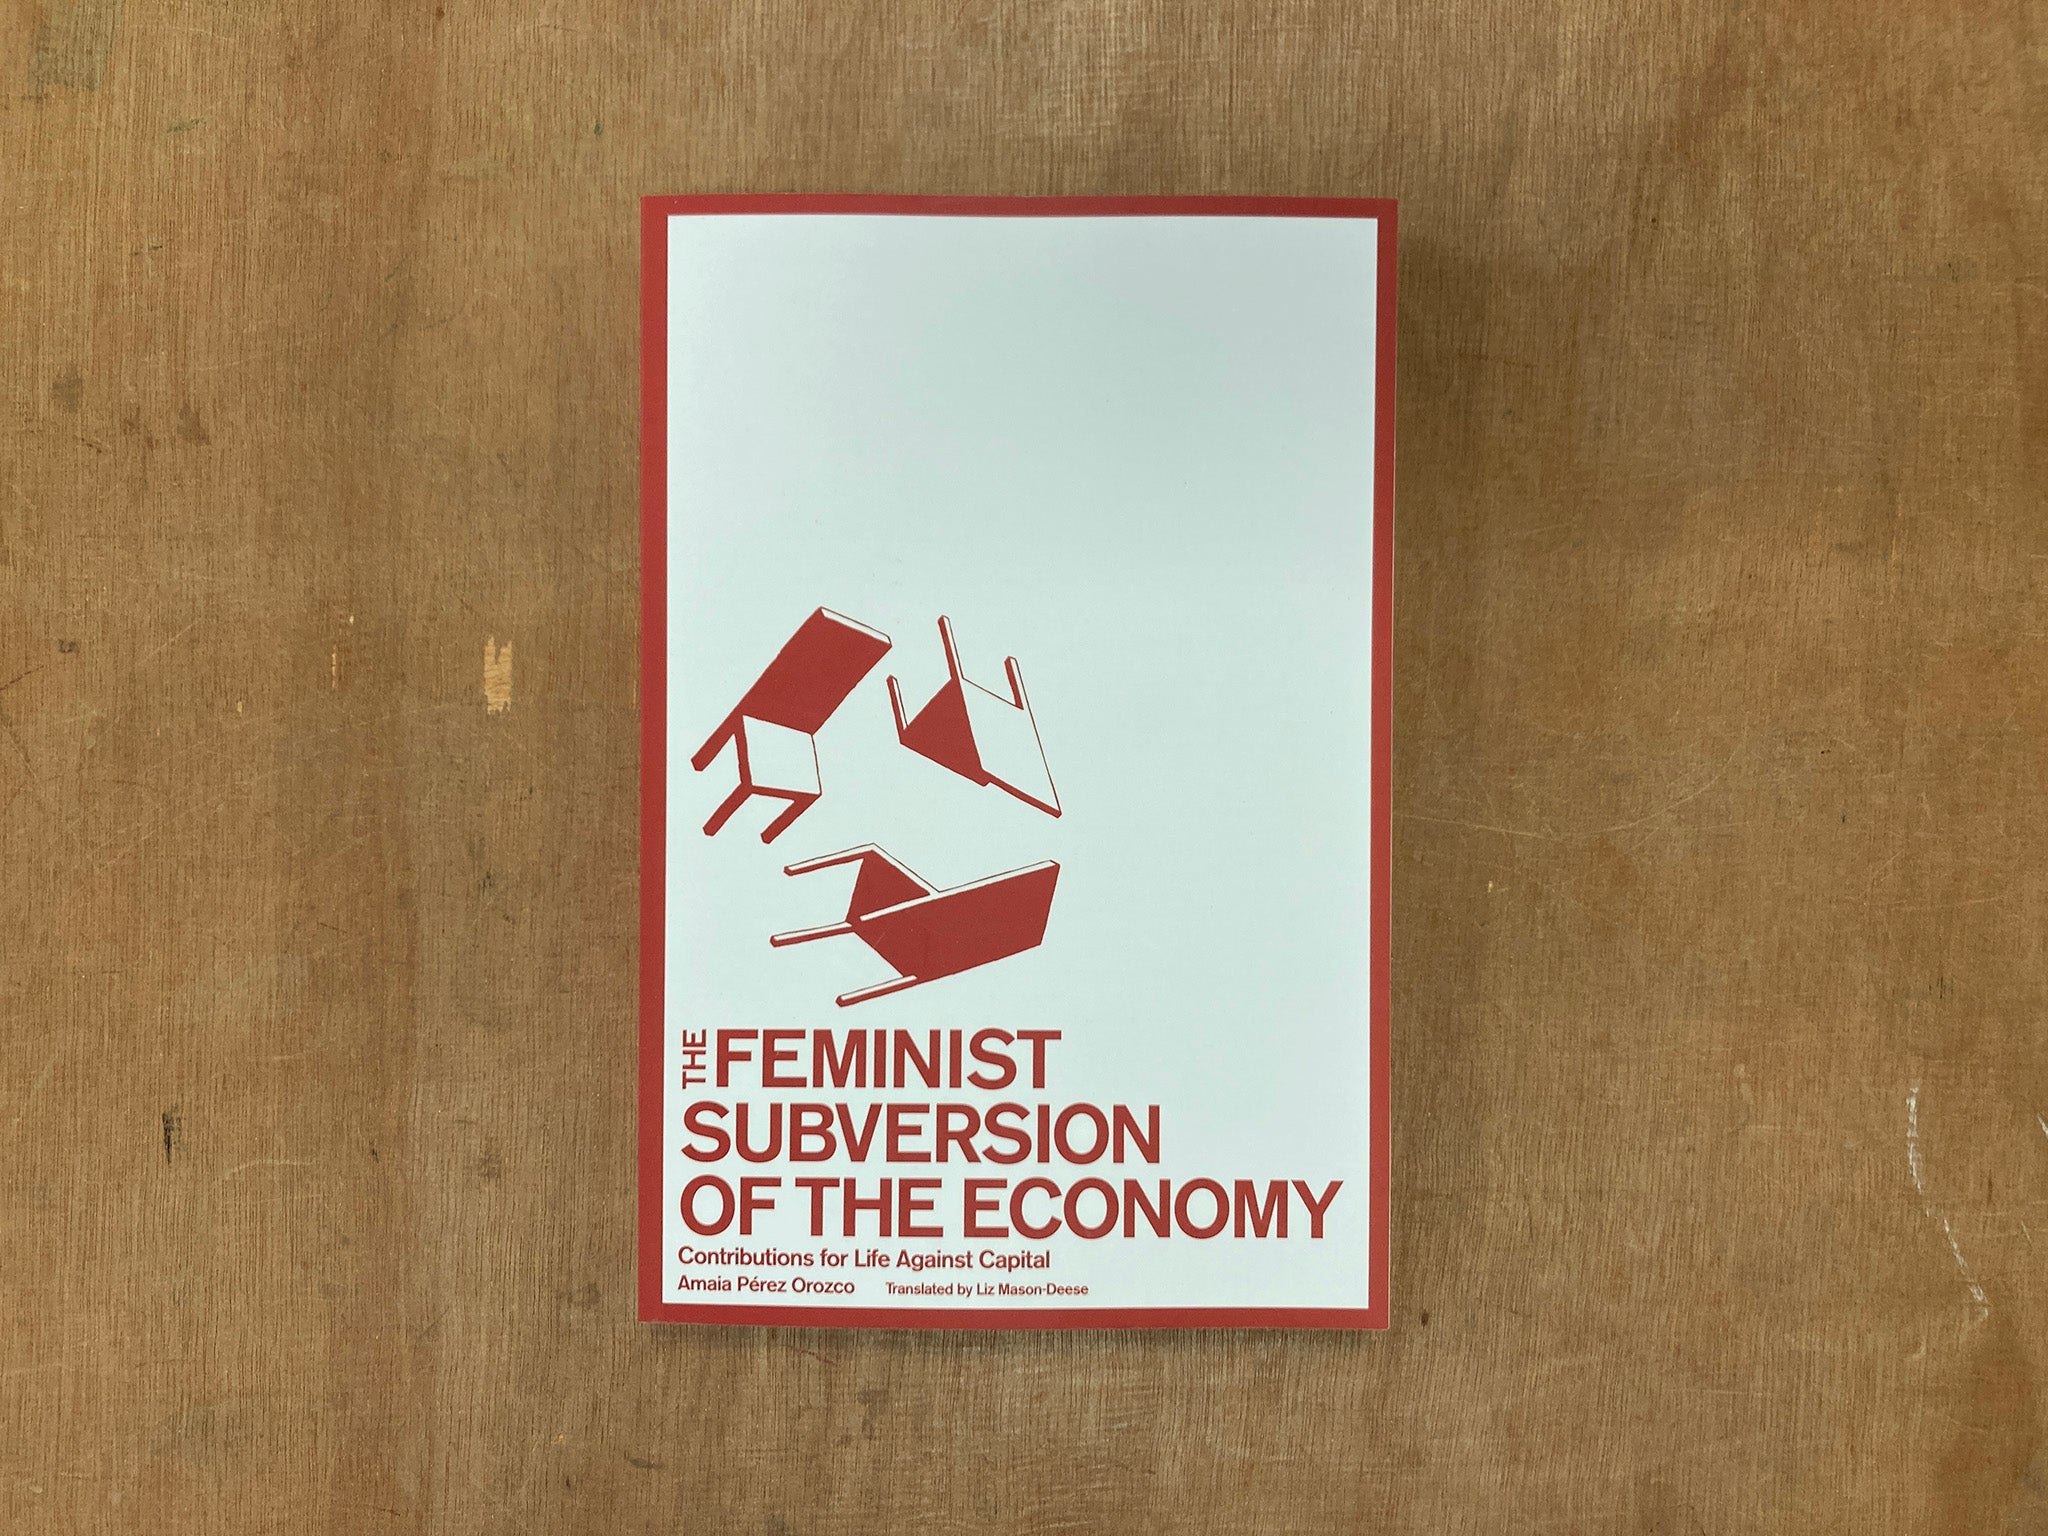 THE FEMINIST SUBVERSION OF THE ECONOMY: CONTRIBUTIONS FOR LIFE AGAINST CAPITAL by Amaia Pérez Orozco, Translated by Liz Mason-Deese